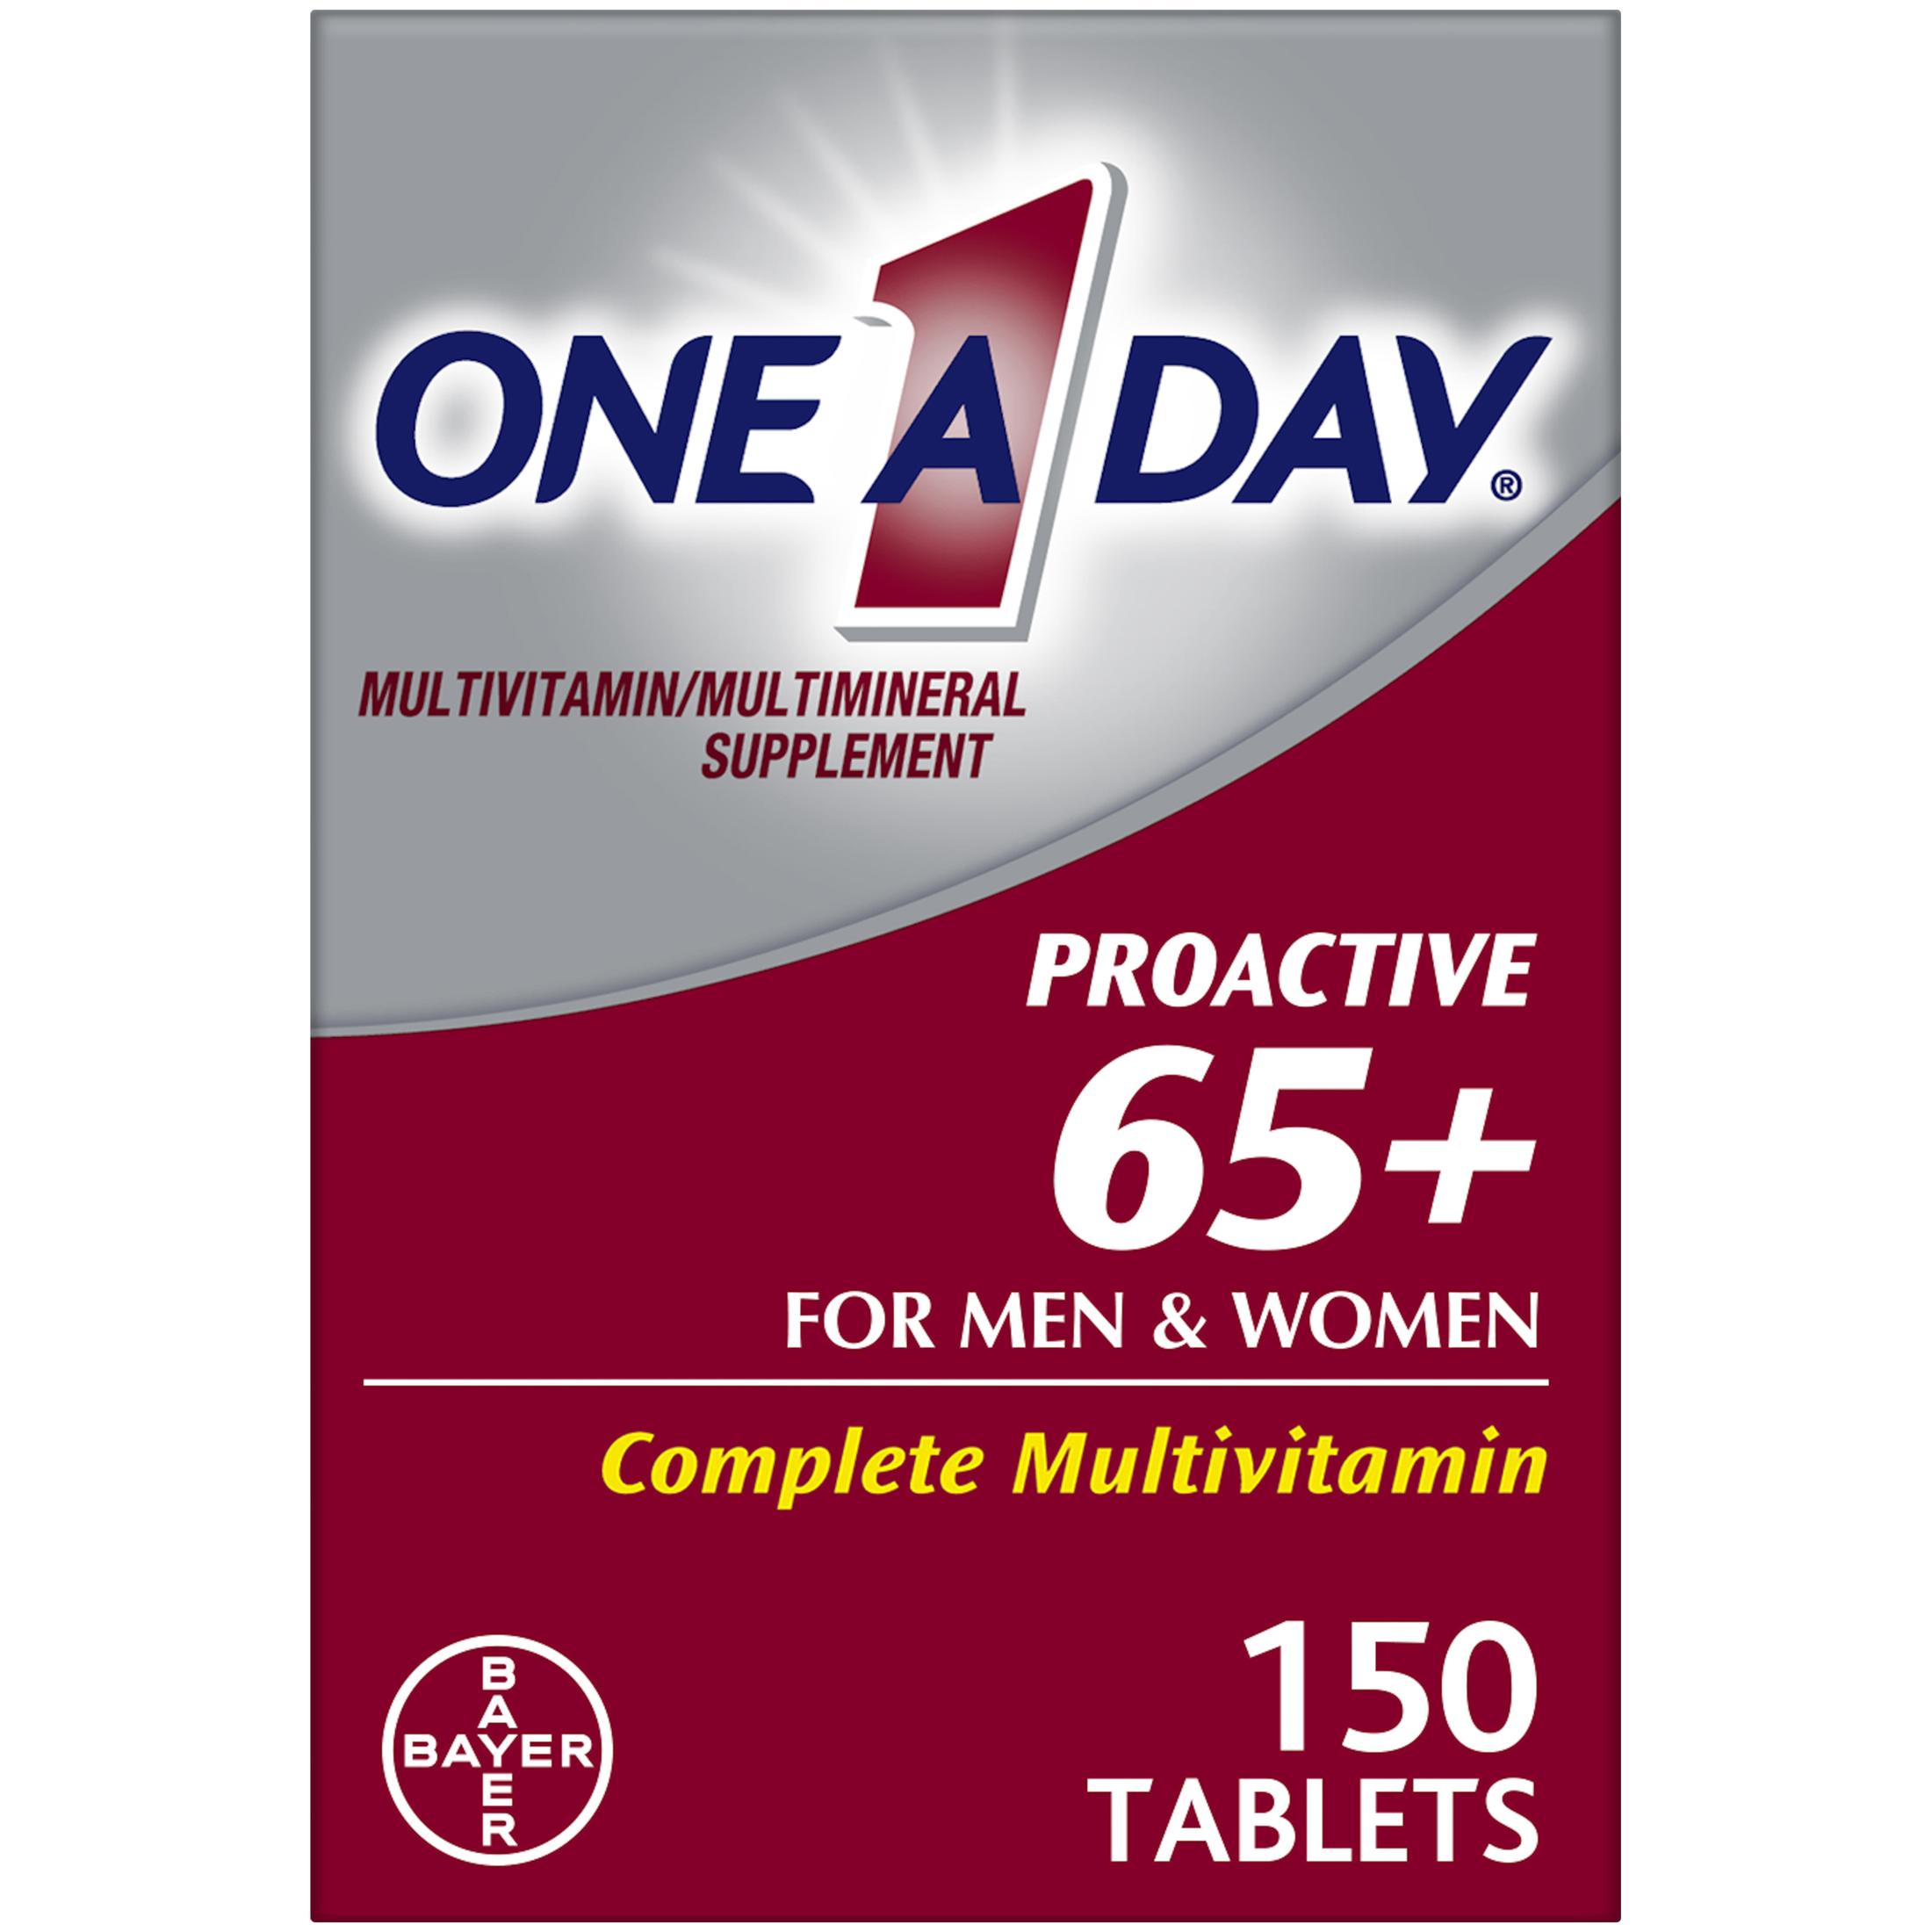 One A Day Proactive 65+ Multivitamin Tablets for Men and Women, 150ct - image 1 of 9